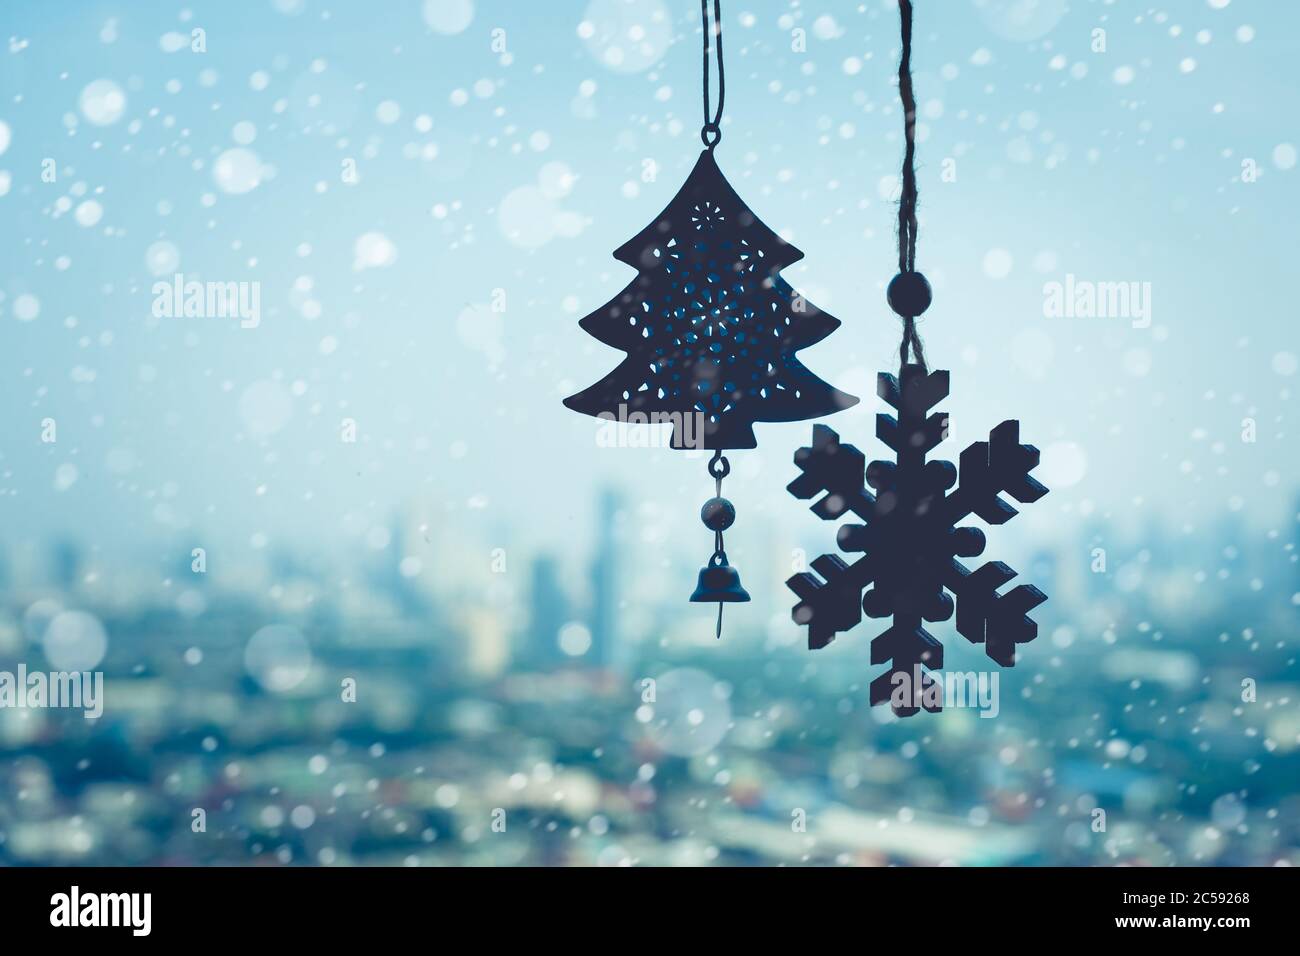 christmas ornament ( Snowflake ) hanging mobile on window with blur outdoor landscape background.season and holiday concepts Stock Photo